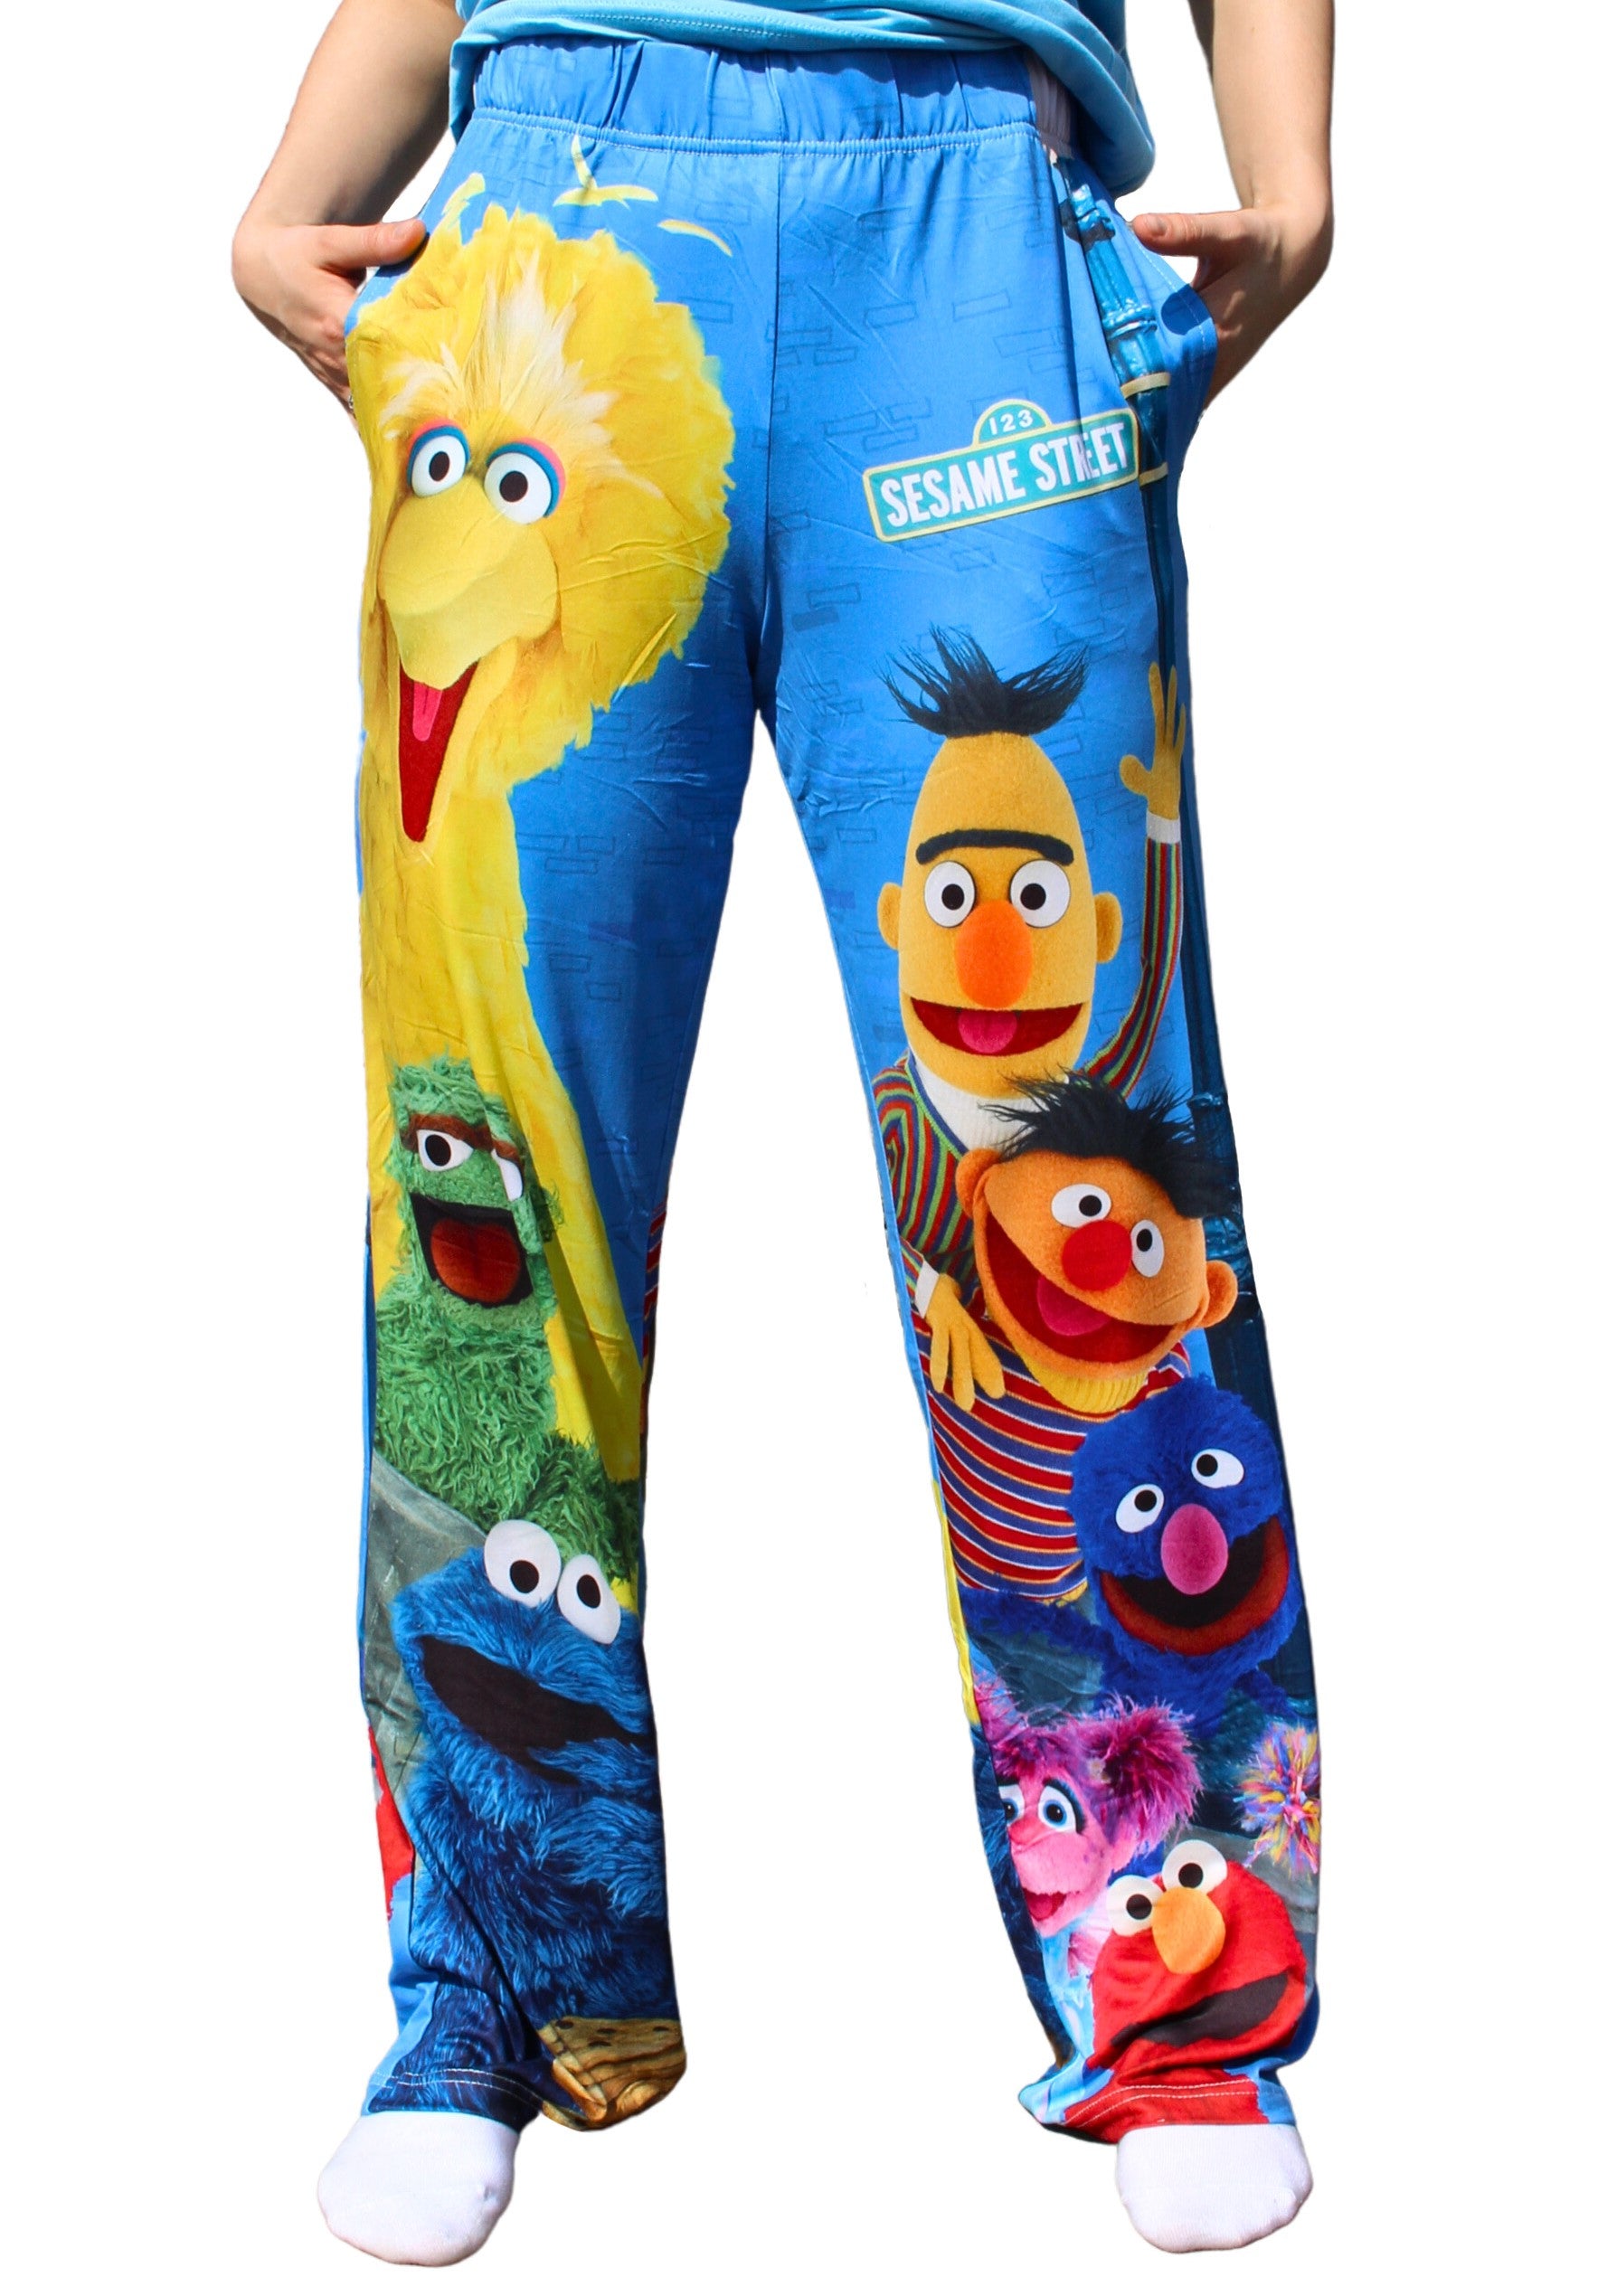 Sesame Street Group pants on model front waist down view